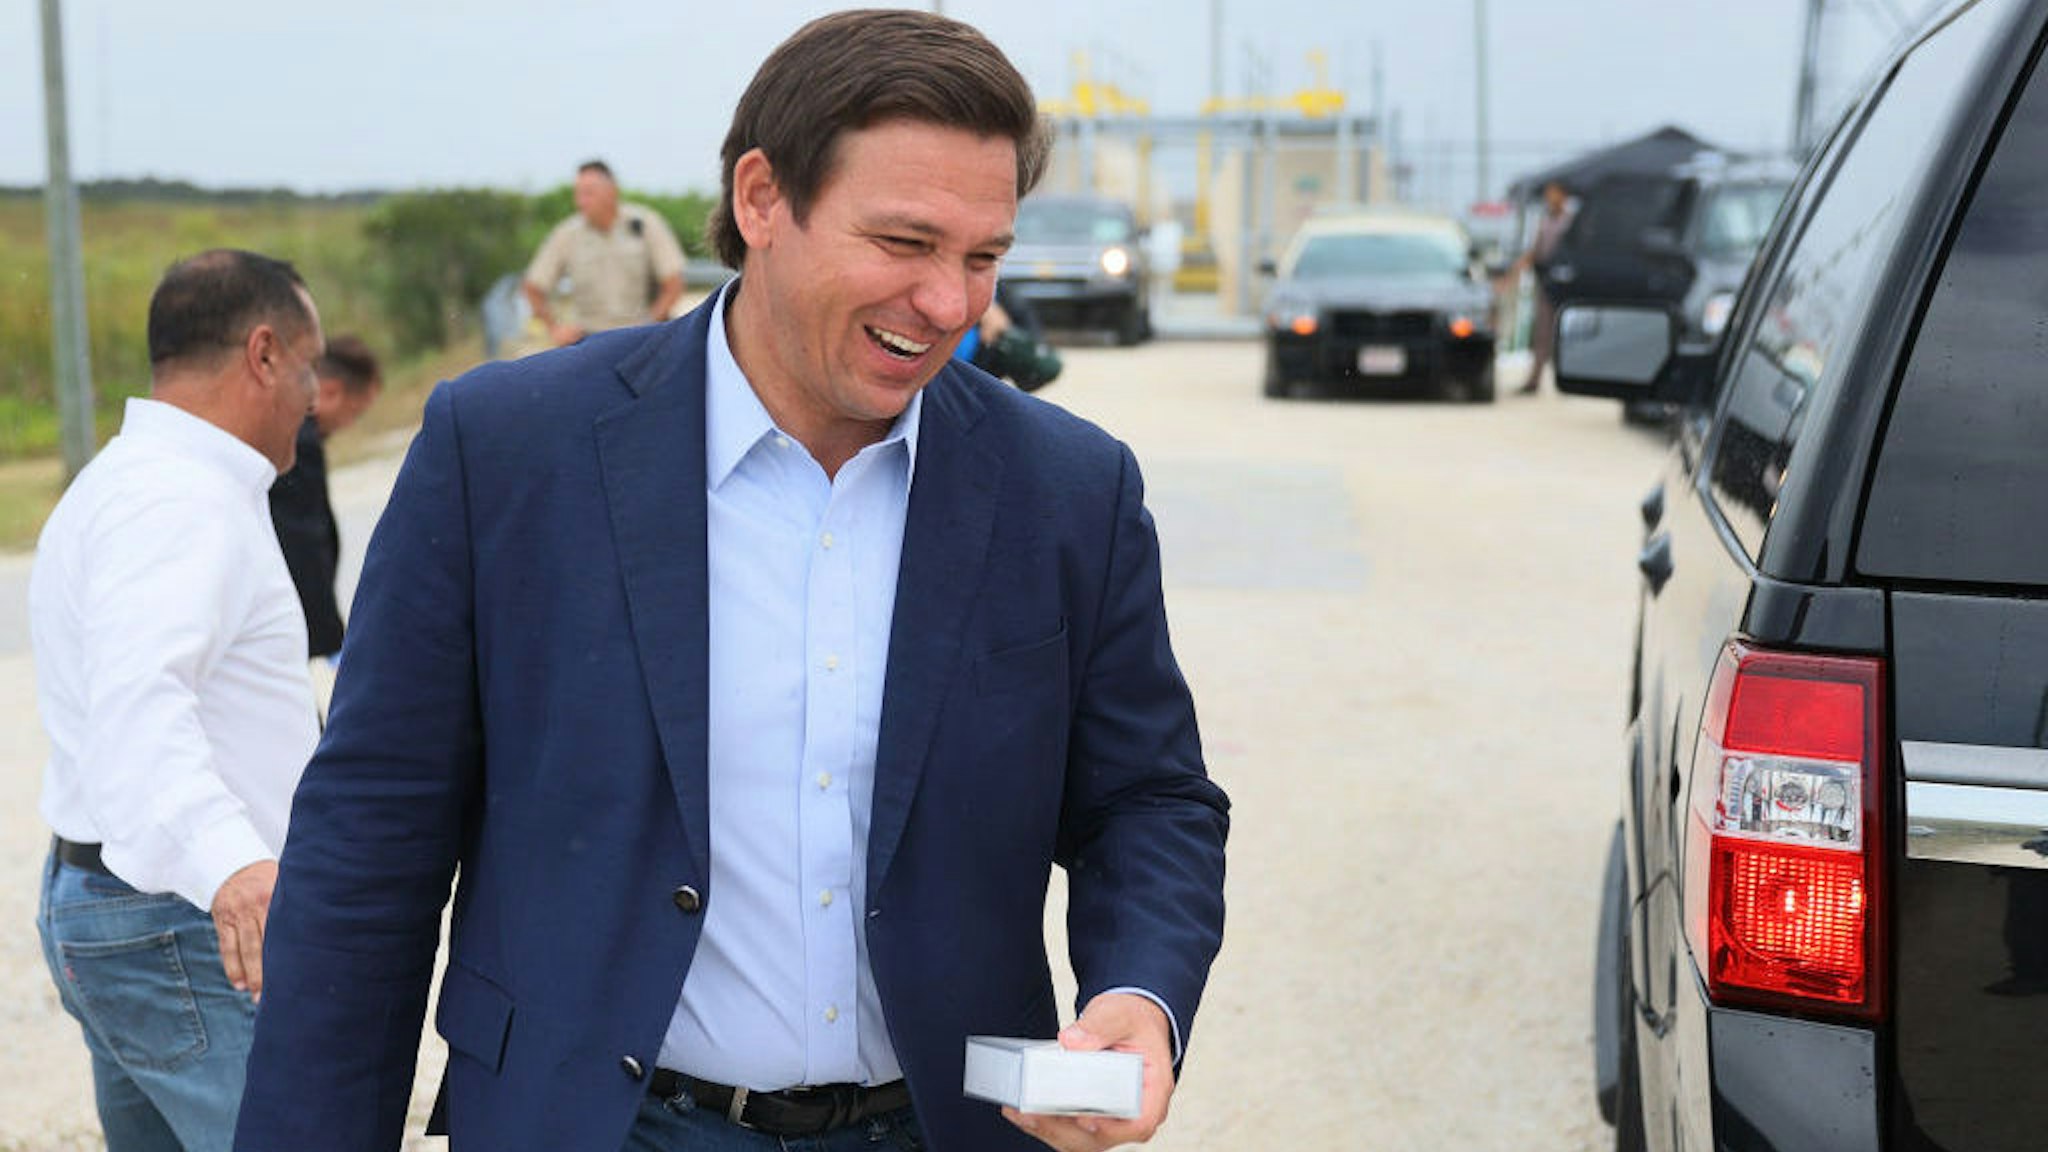 MIAMI, FLORIDA - JUNE 03: Florida Gov. Ron DeSantis leaves after holding a press conference to kickoff the 2021 Python Challenge in the Everglades on June 03, 2021 in Miami, Florida. The 10-day event will run from July 9 to 18, with prizes going to participants who catch the most and the biggest pythons. The event began as a way for hunters to help control the population of the invasive Burmese python in the Florida Everglades. (Photo by Joe Raedle/Getty Images)